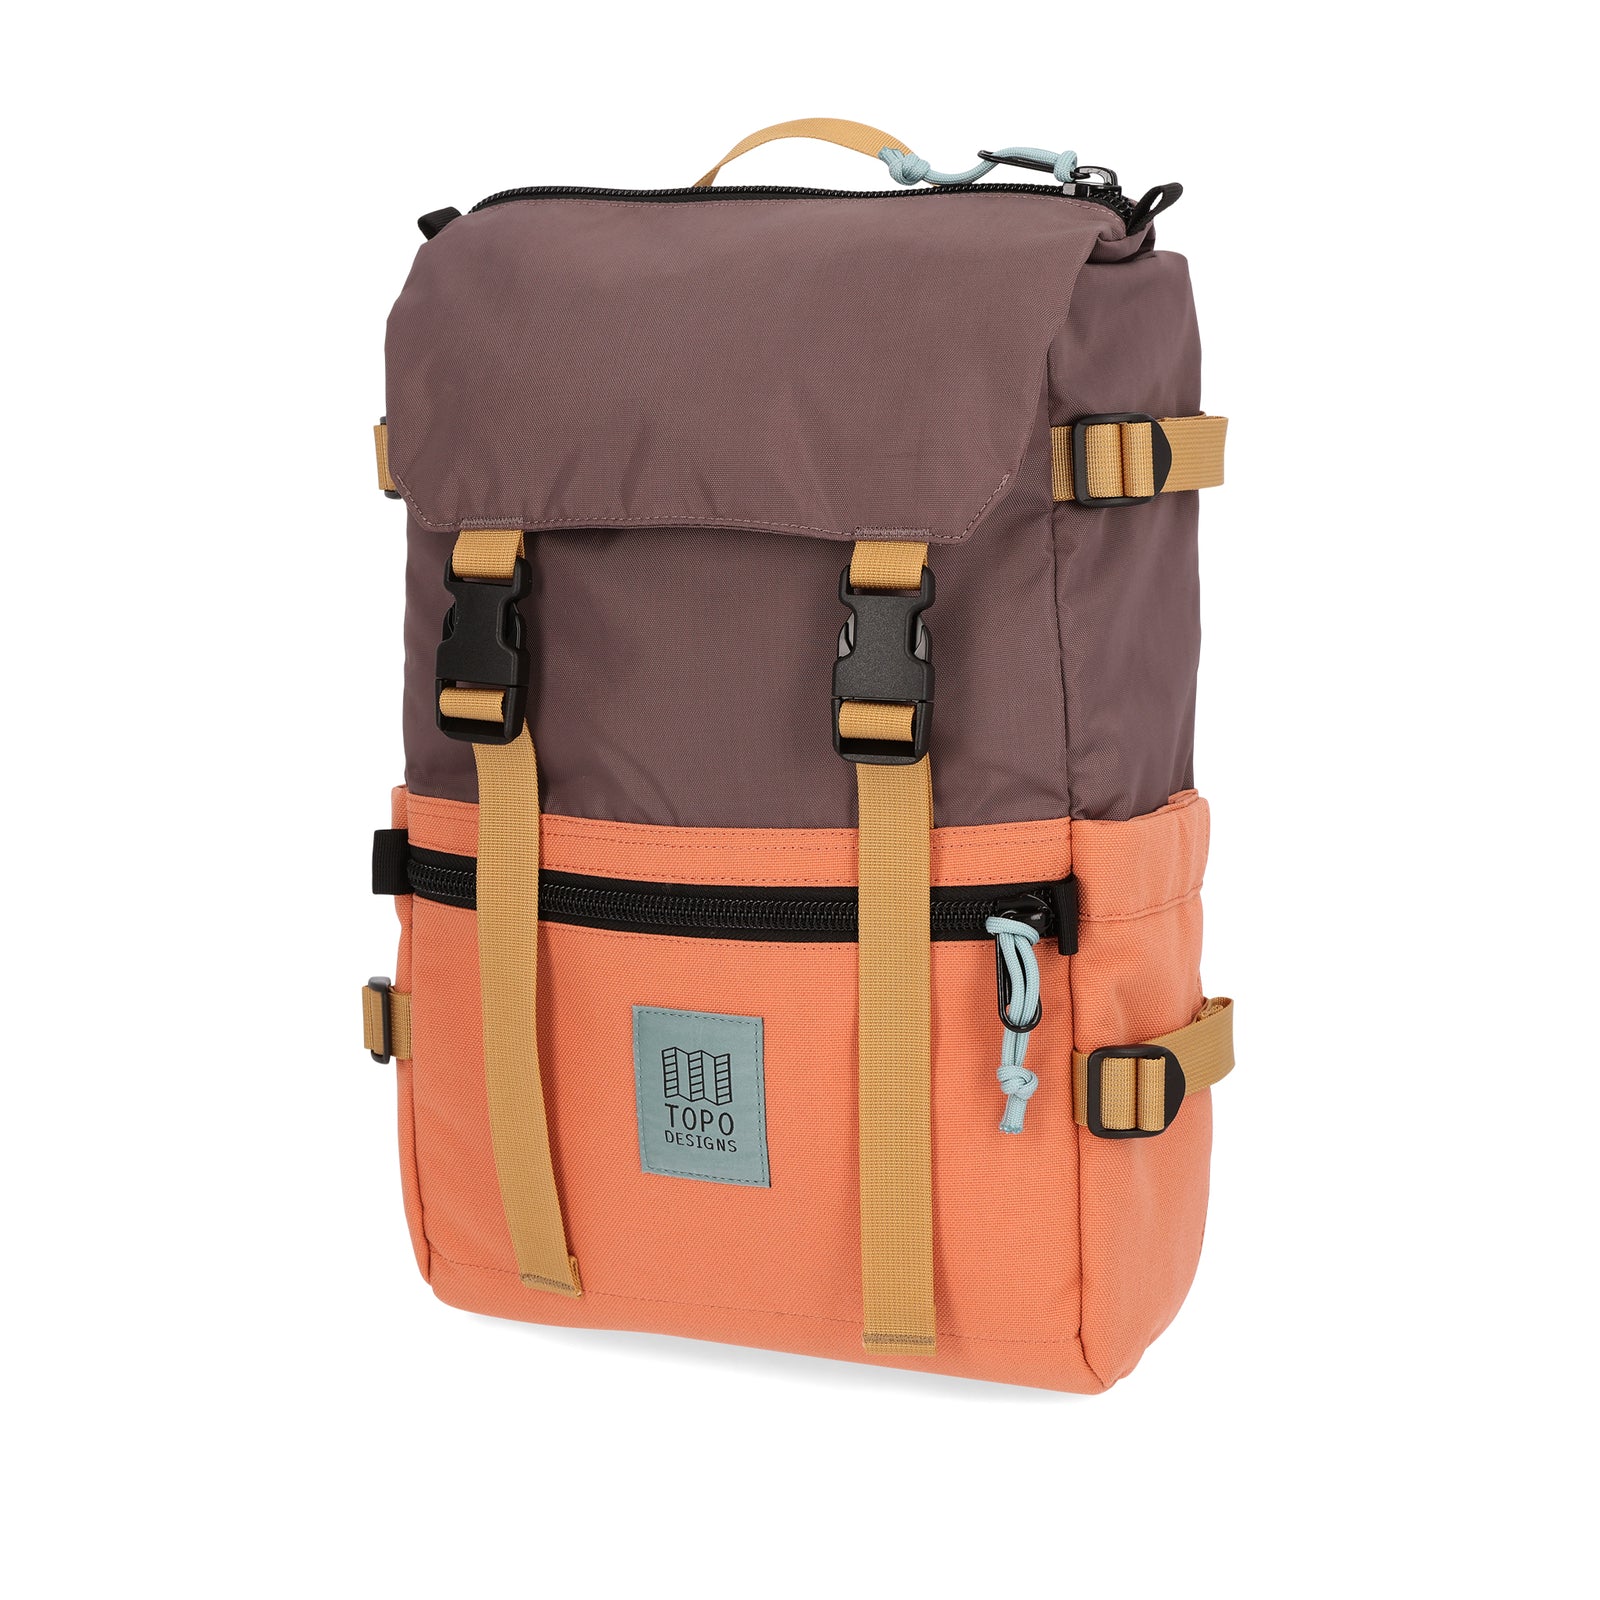 Topo Designs Rover Pack Classic laptop backpack in "Coral / Peppercorn".